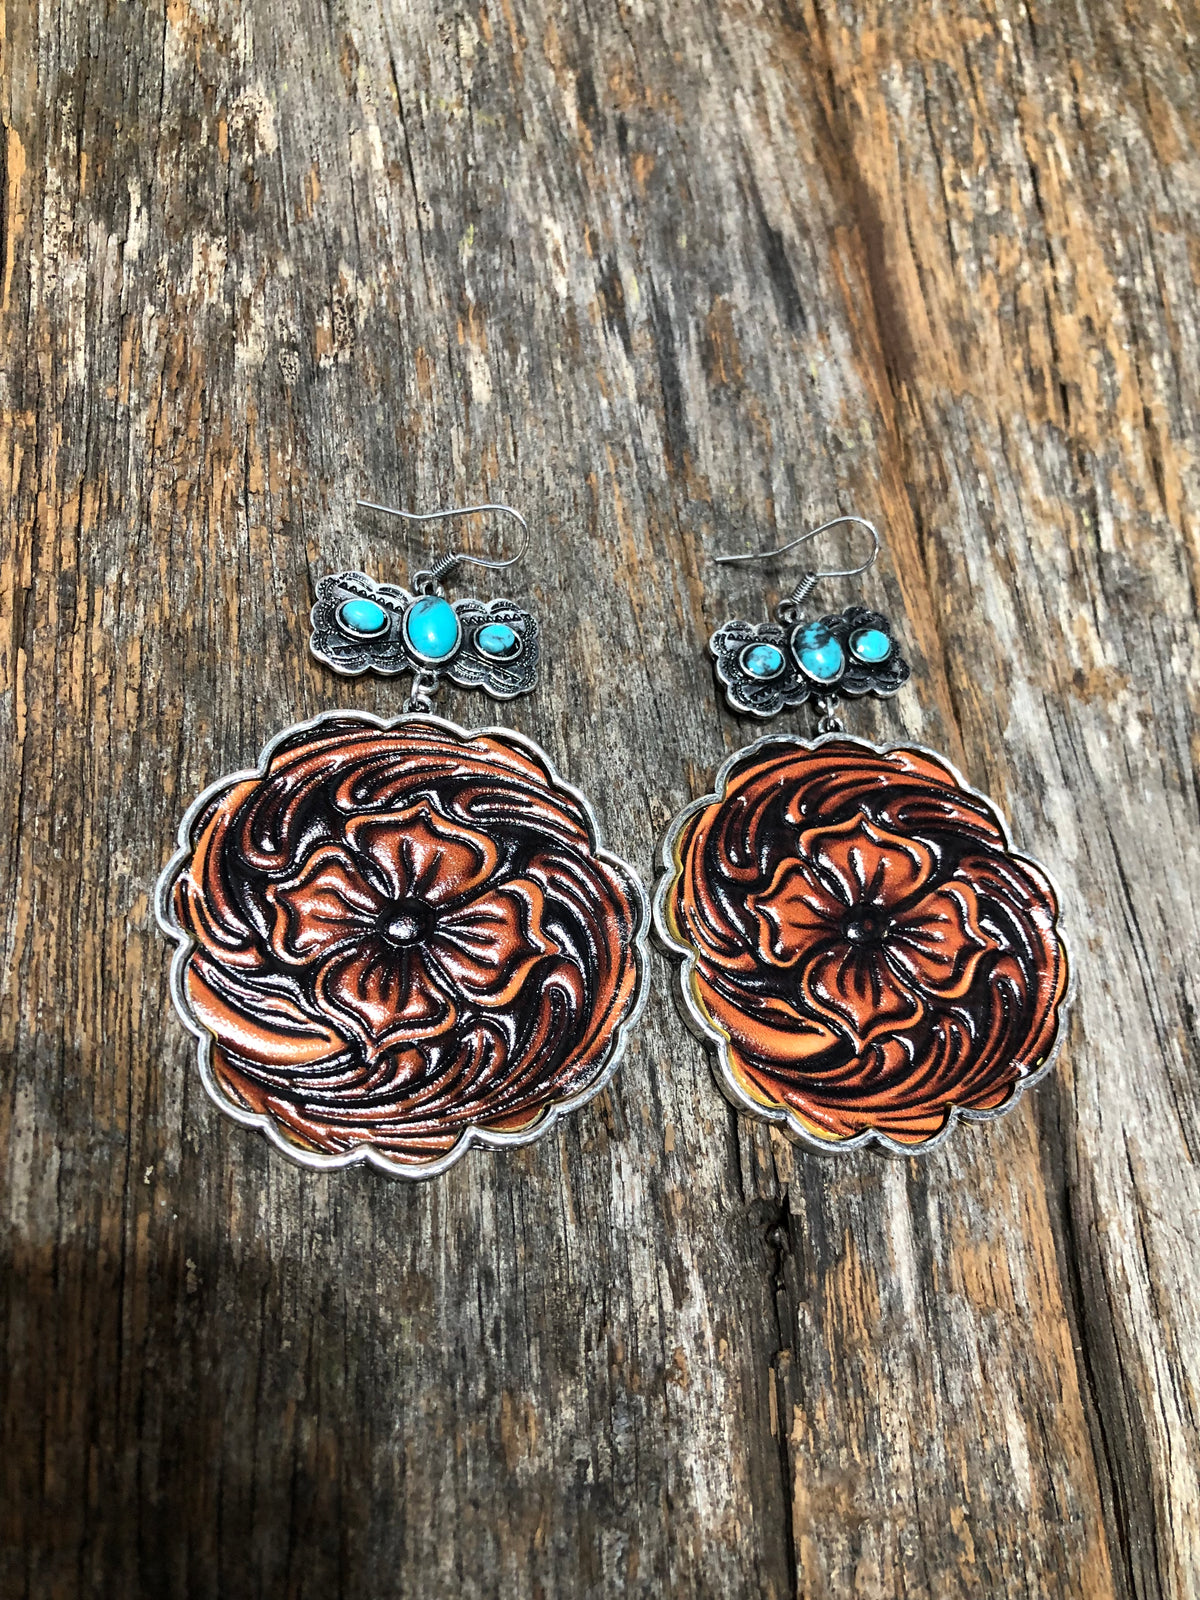 Western Earrings - Round Floral Leather Drop